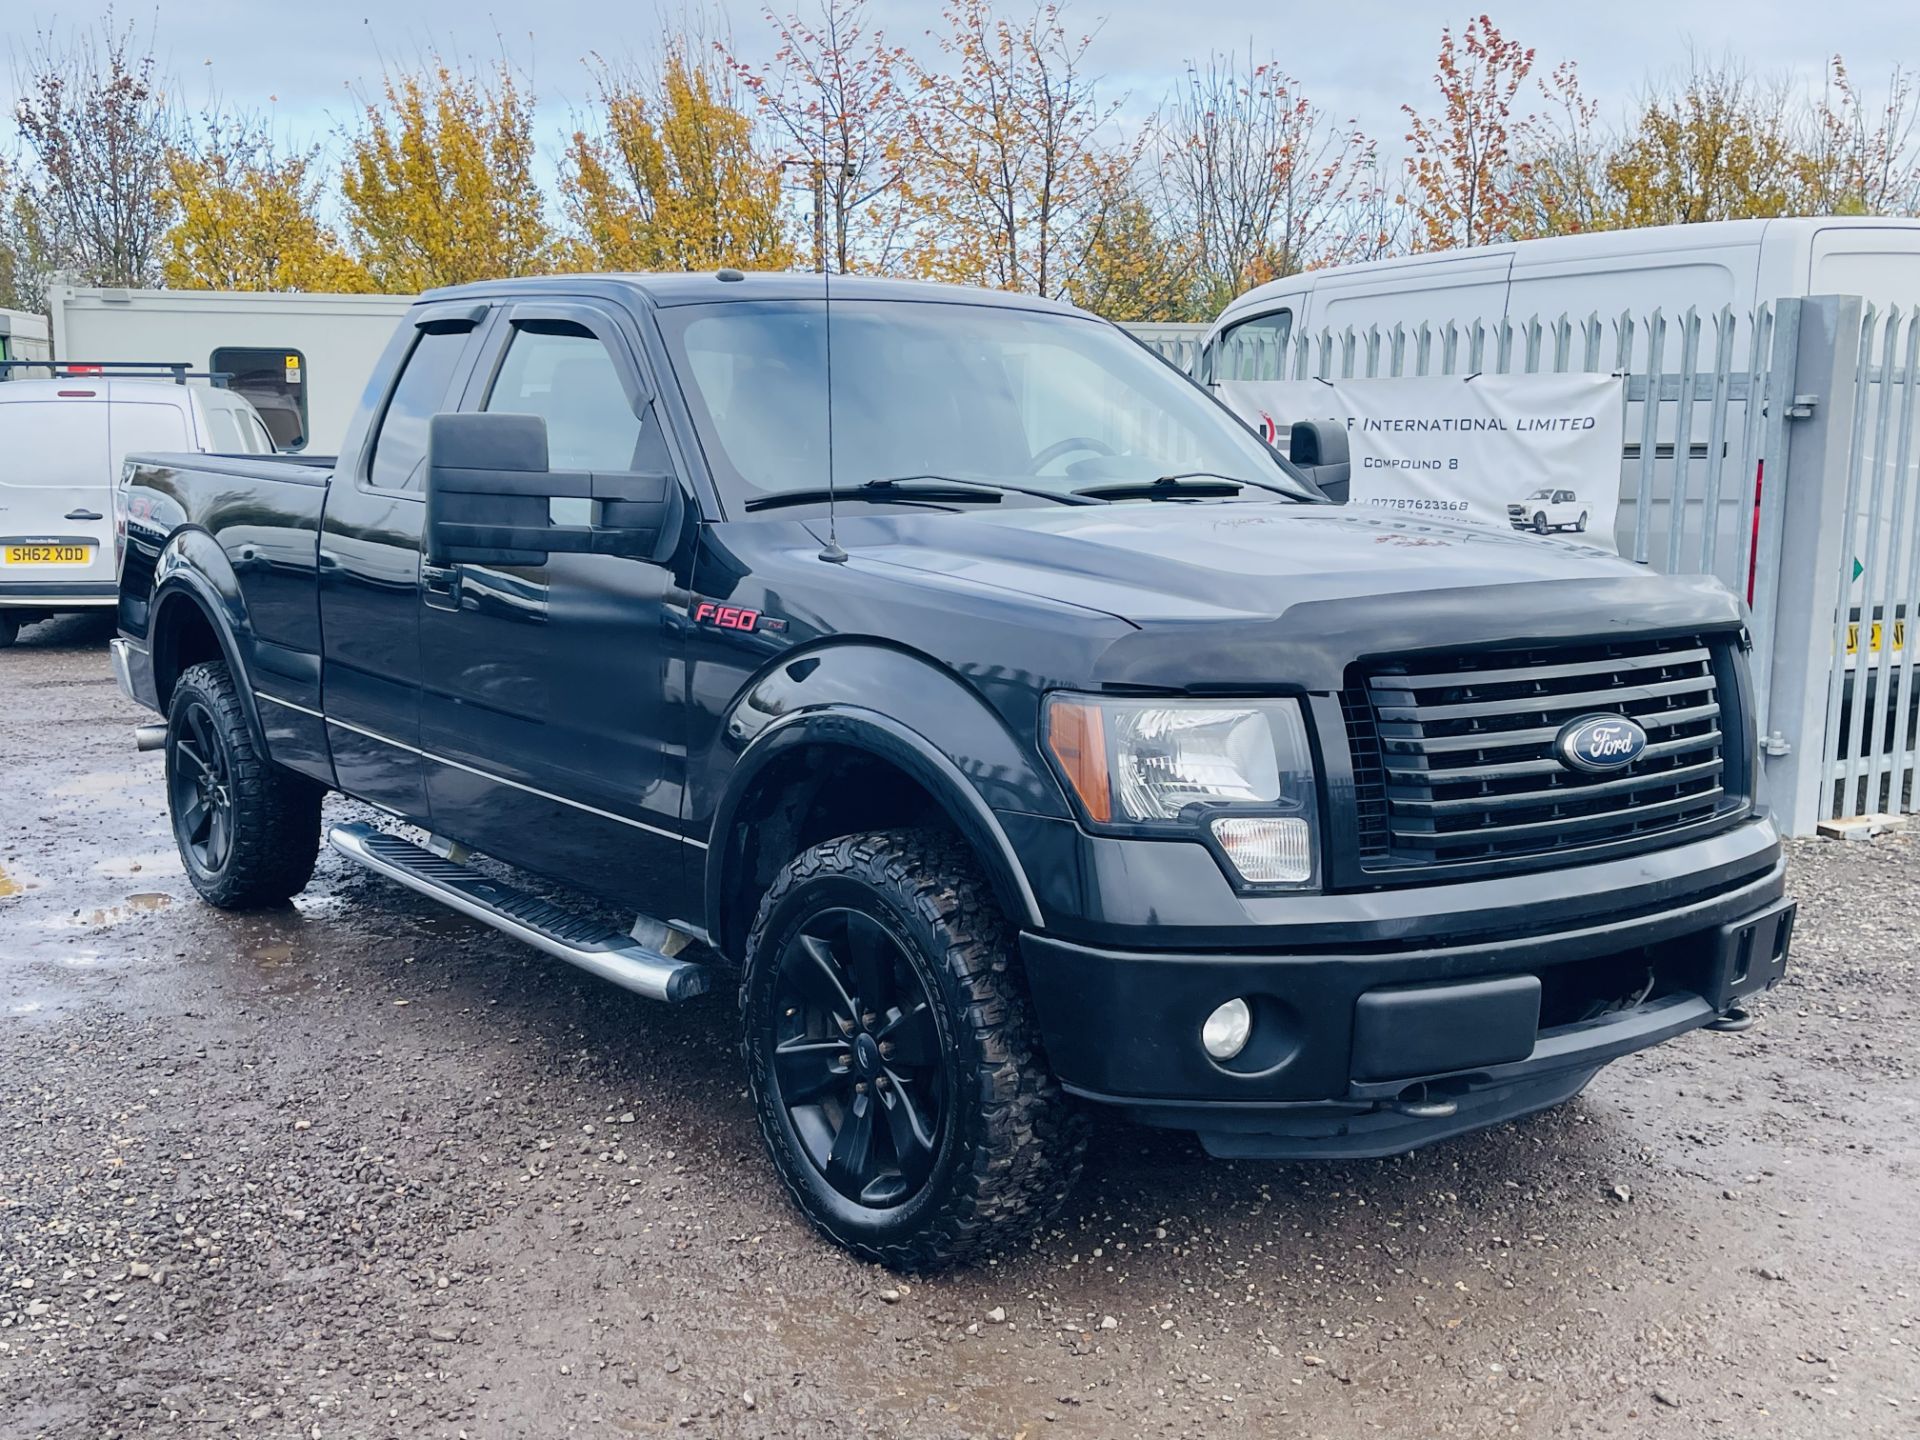 ** ON SALE ** Ford F-150 3.5L V6 SuperCab 4WD FX4 Edition '2012 Year' Colour Coded Package - FX4 - Image 5 of 32